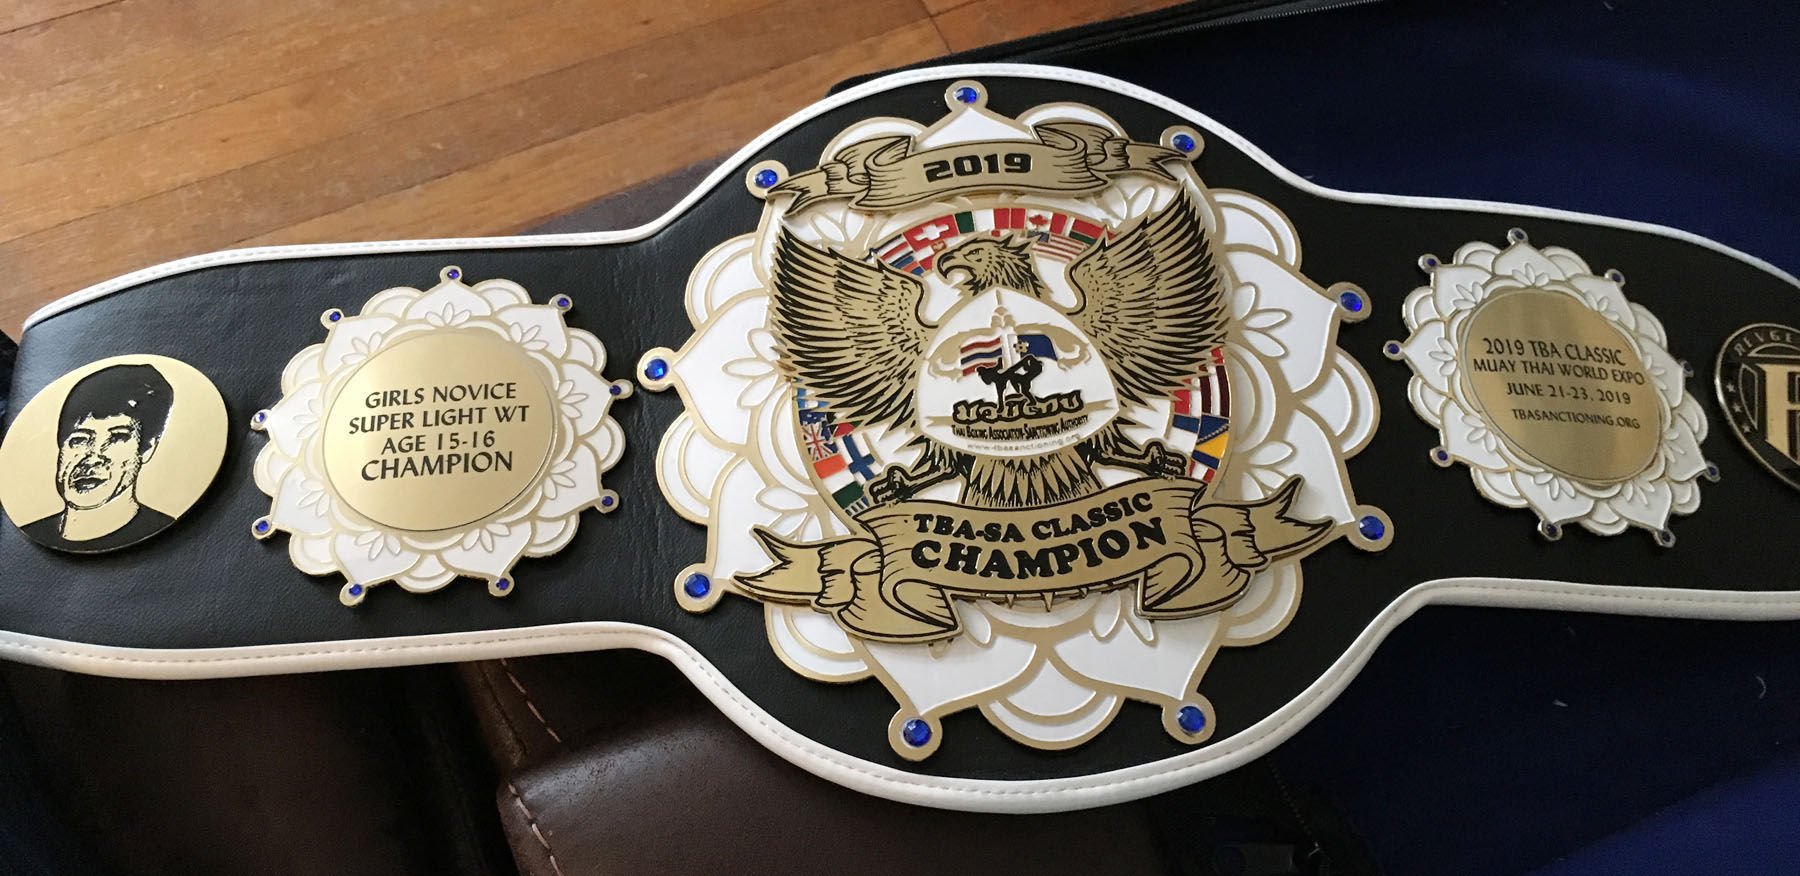 Title fighter Morris wins championship belt in national Muay Thai competition Sports newswatchman